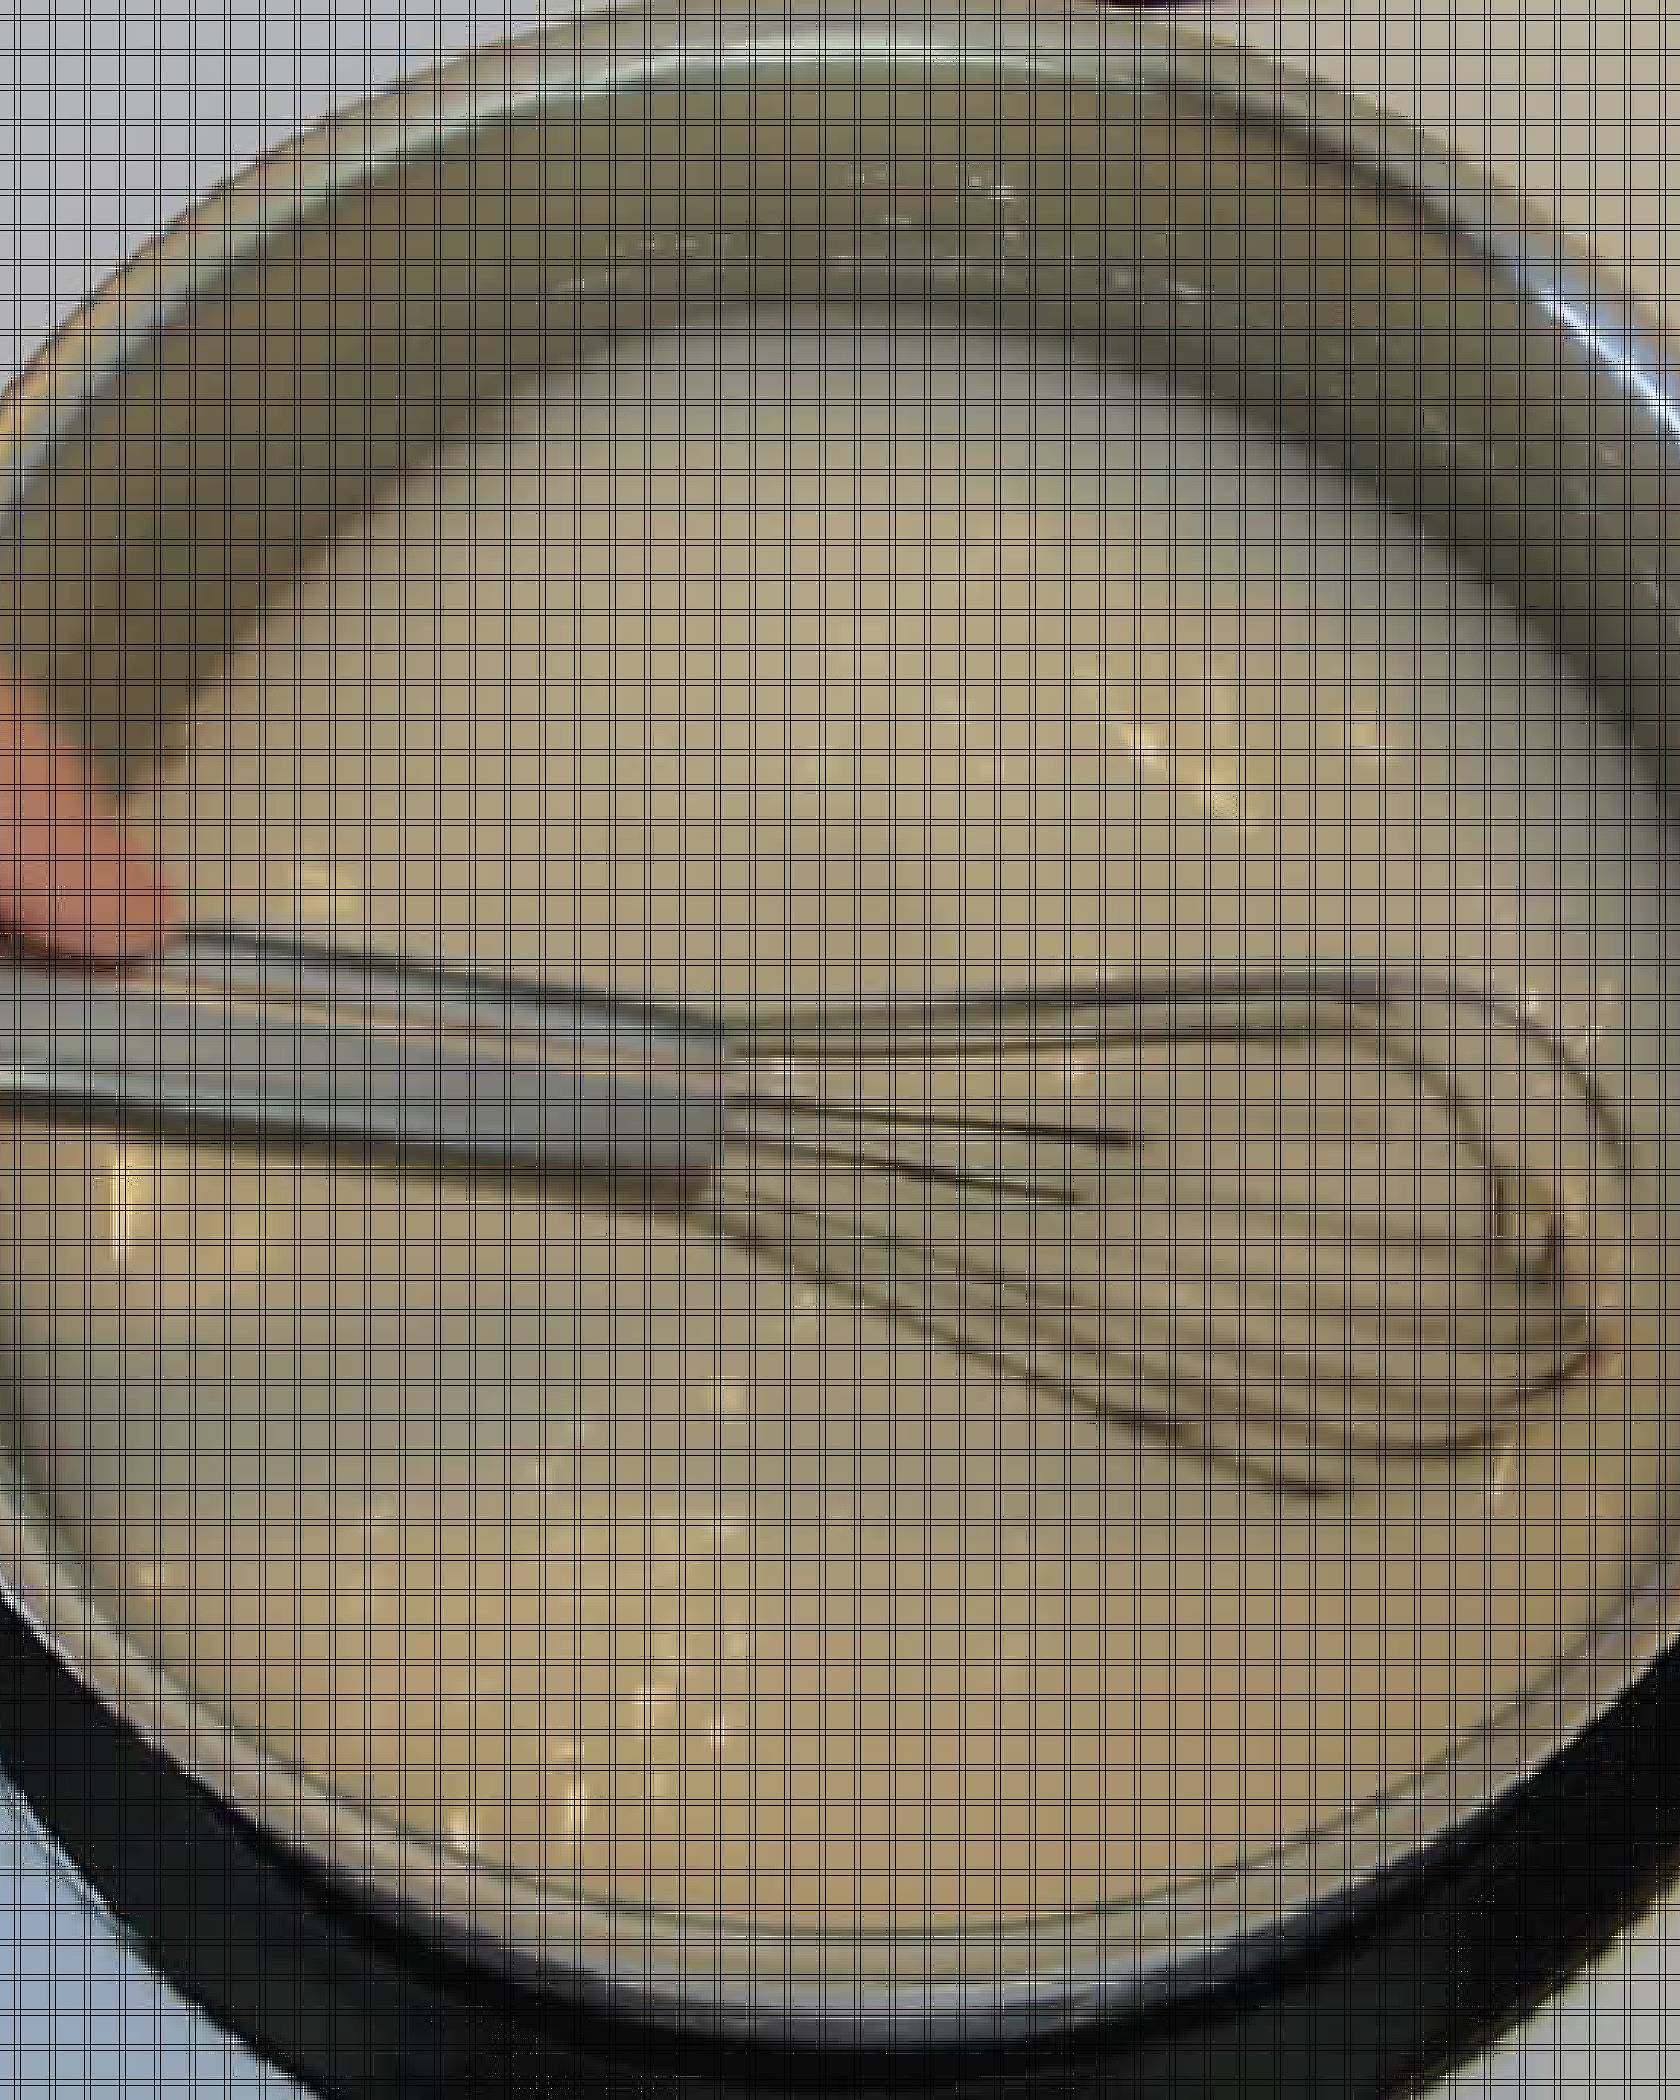 whisk mixture in pot